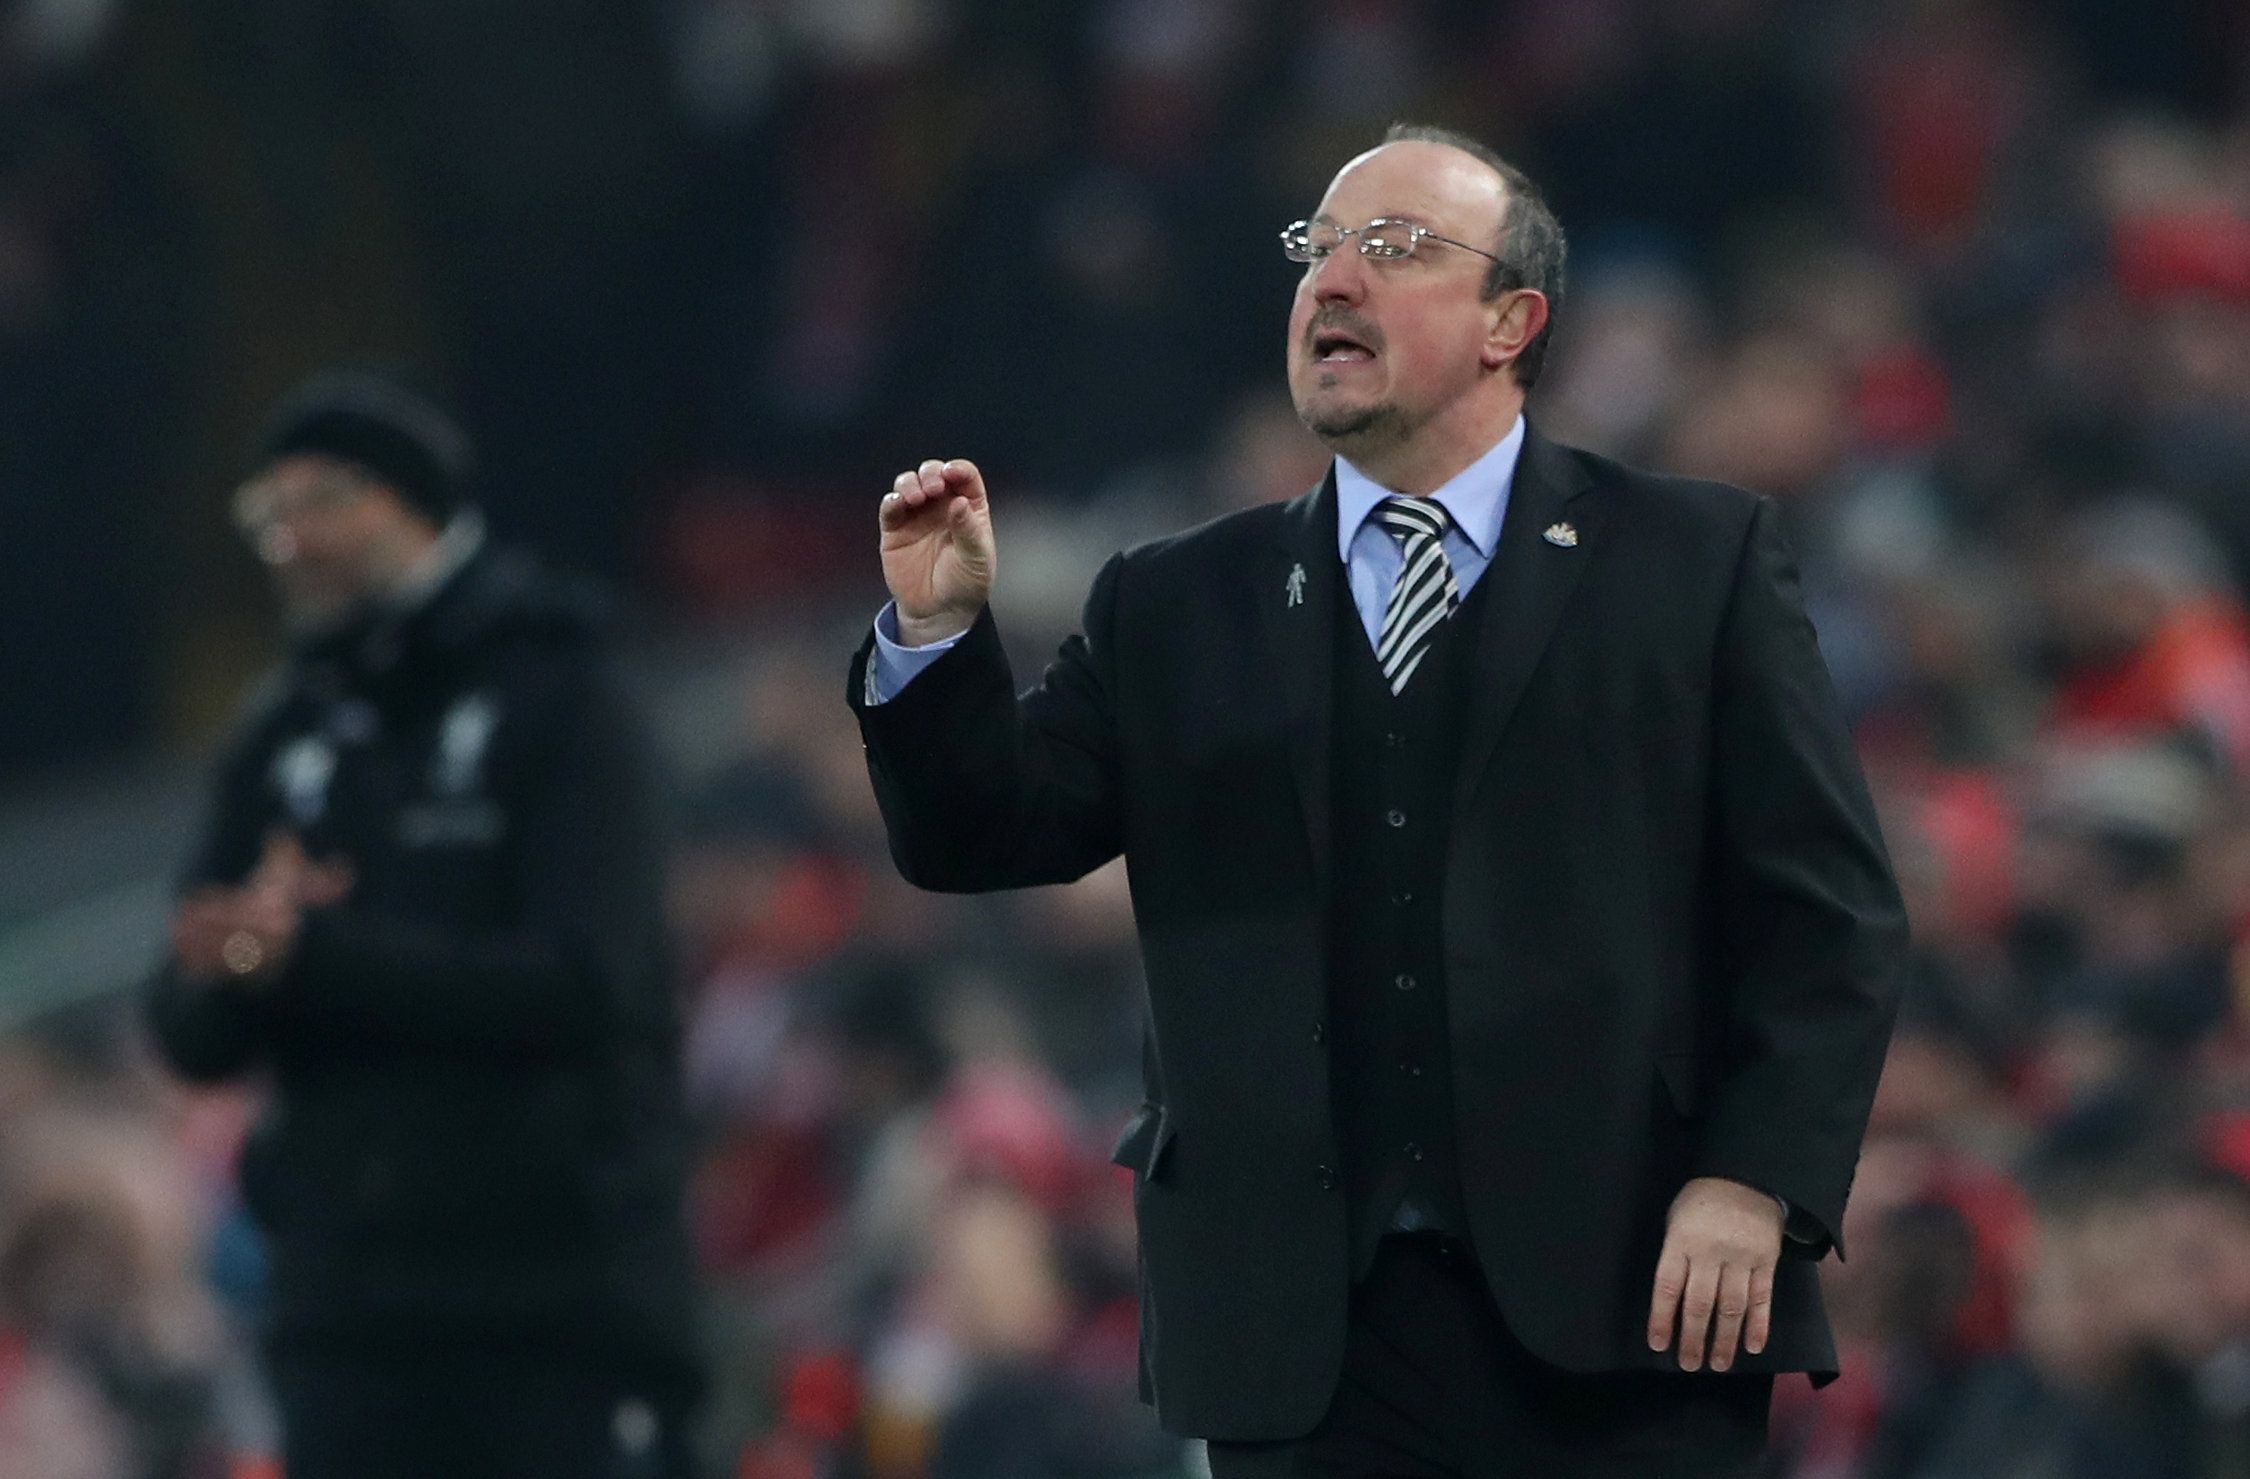 Soccer Football - Premier League - Liverpool vs Newcastle United - Anfield, Liverpool, Britain - March 3, 2018   Newcastle United manager Rafael Benitez          REUTERS/Scott Heppell    EDITORIAL USE ONLY. No use with unauthorized audio, video, data, fixture lists, club/league logos or 